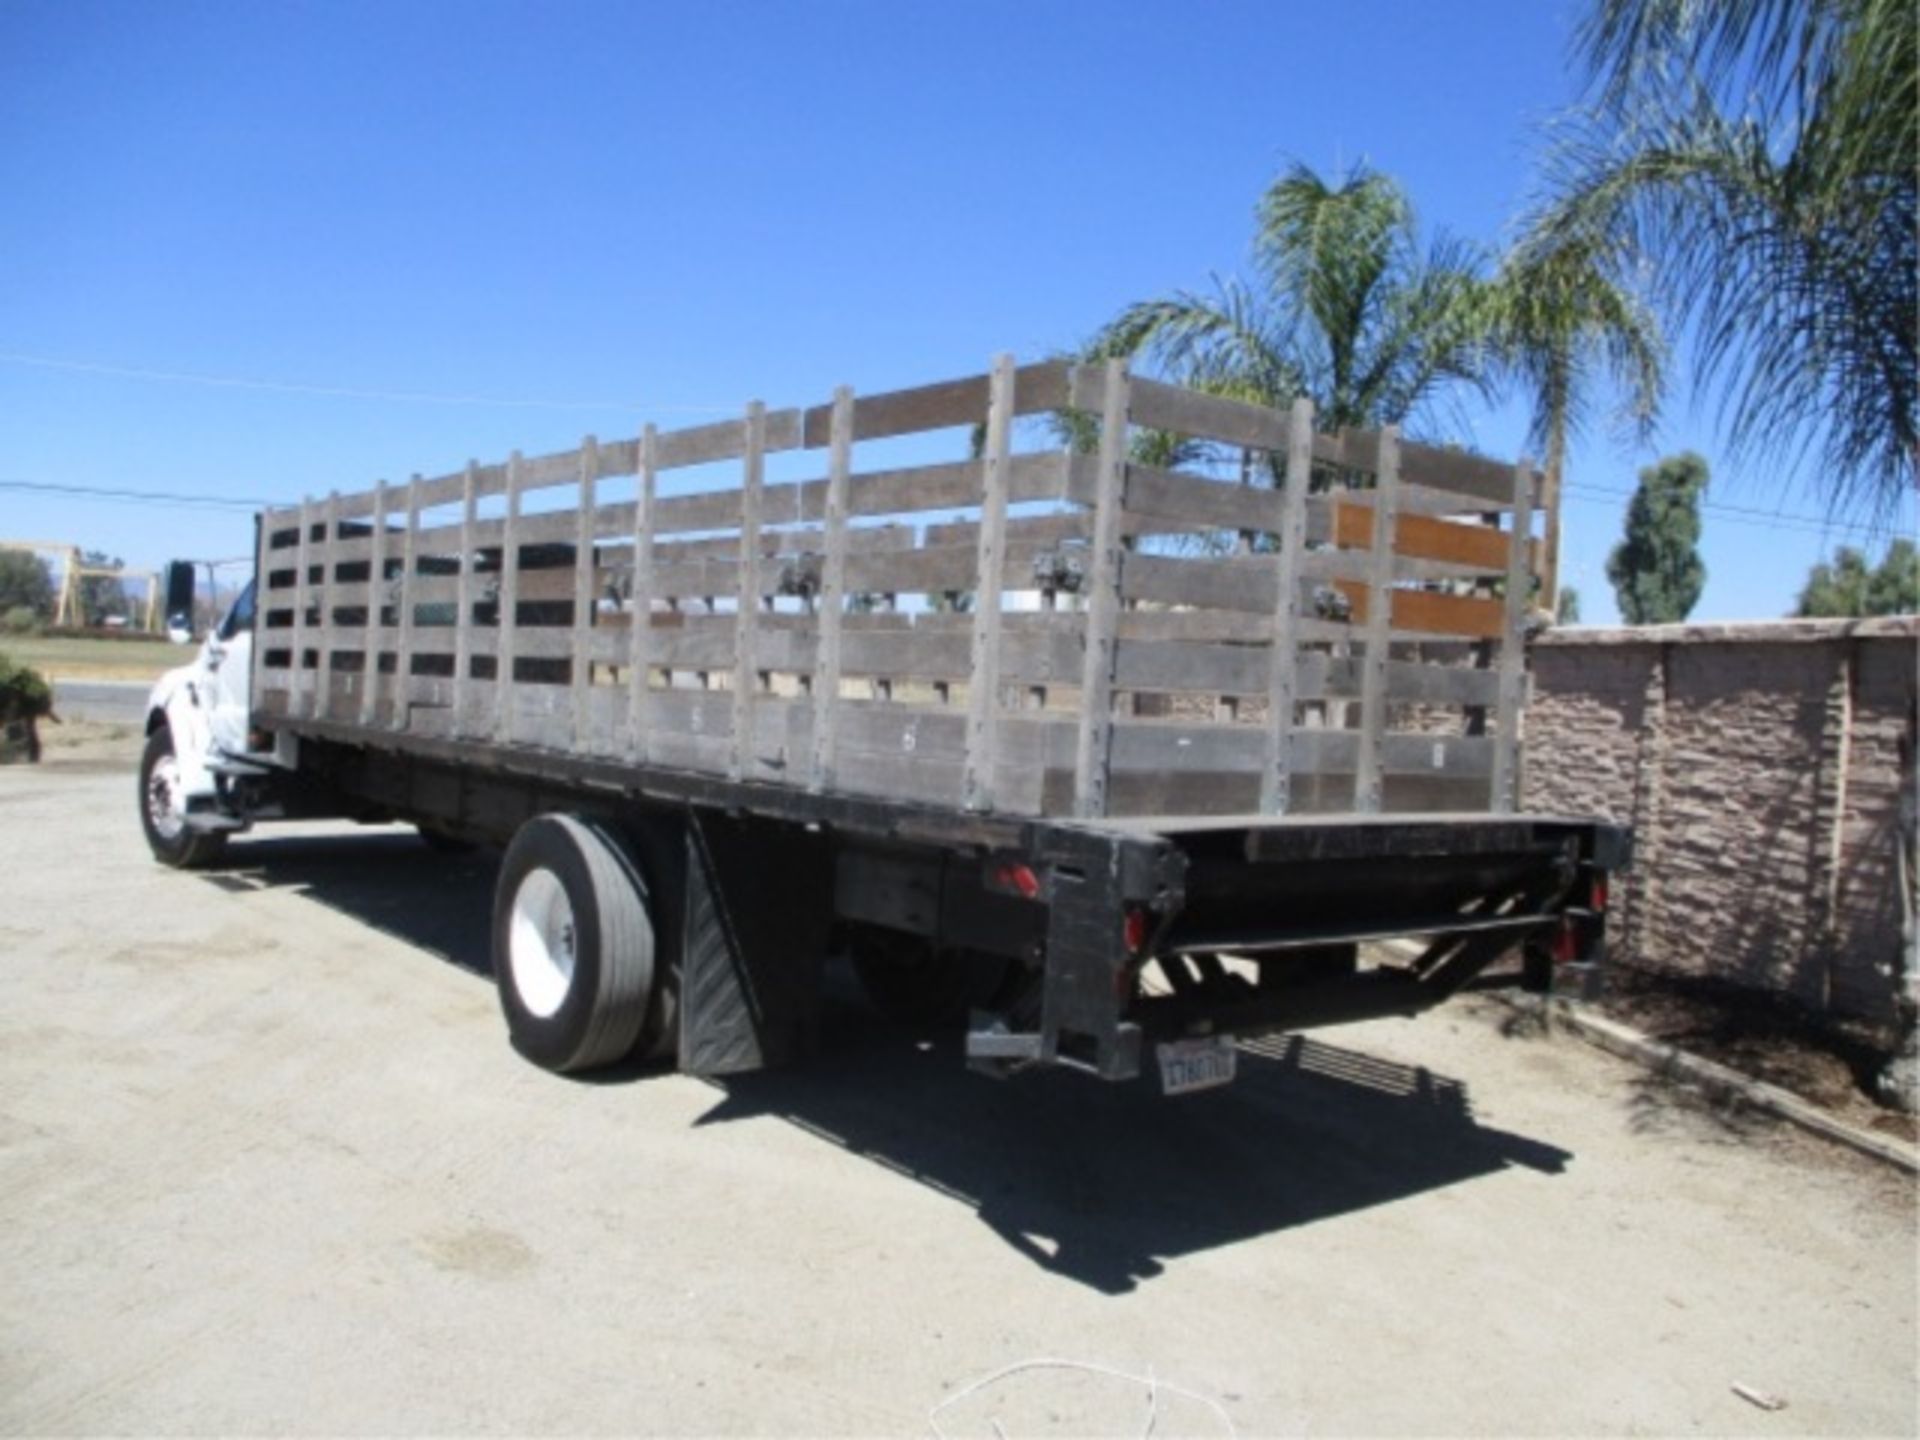 2005 Ford F650 S/A Flatbed Stakebed Truck, Cat C7 Acert 7.2L 6-Cyl Diesel, Automatic, Lift Gate, 24' - Image 22 of 61